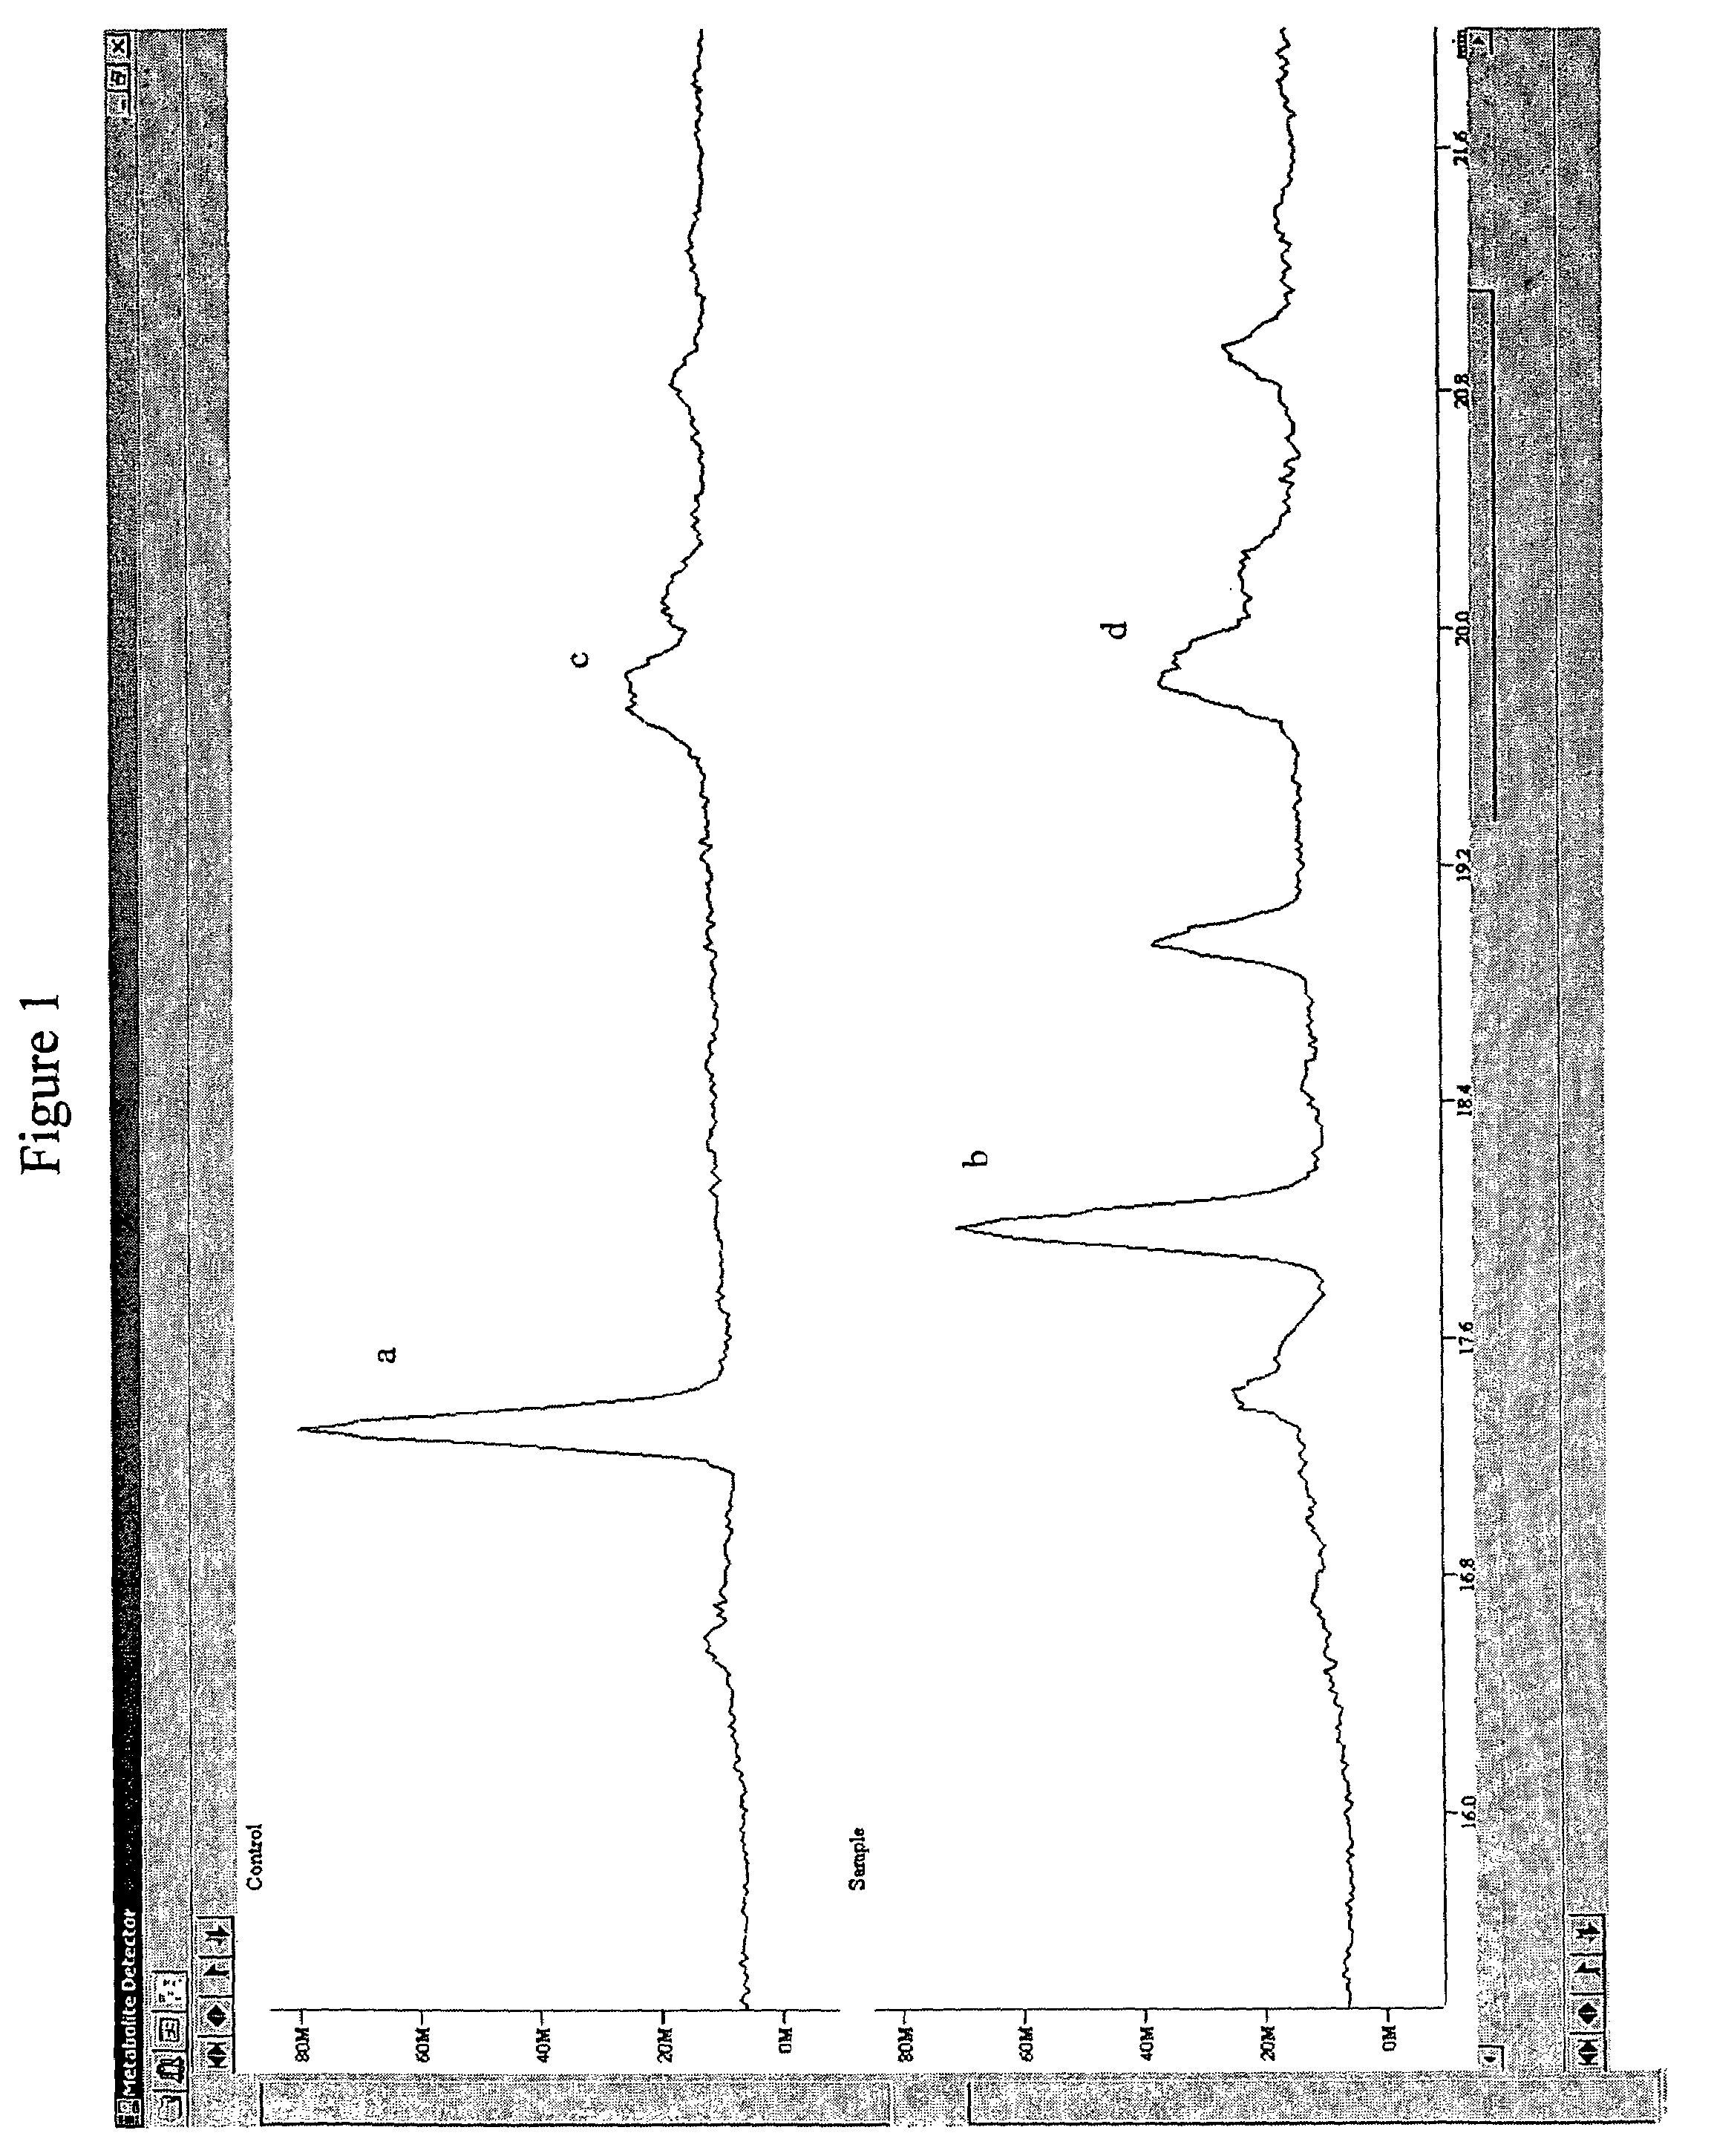 System and method for feature alignment